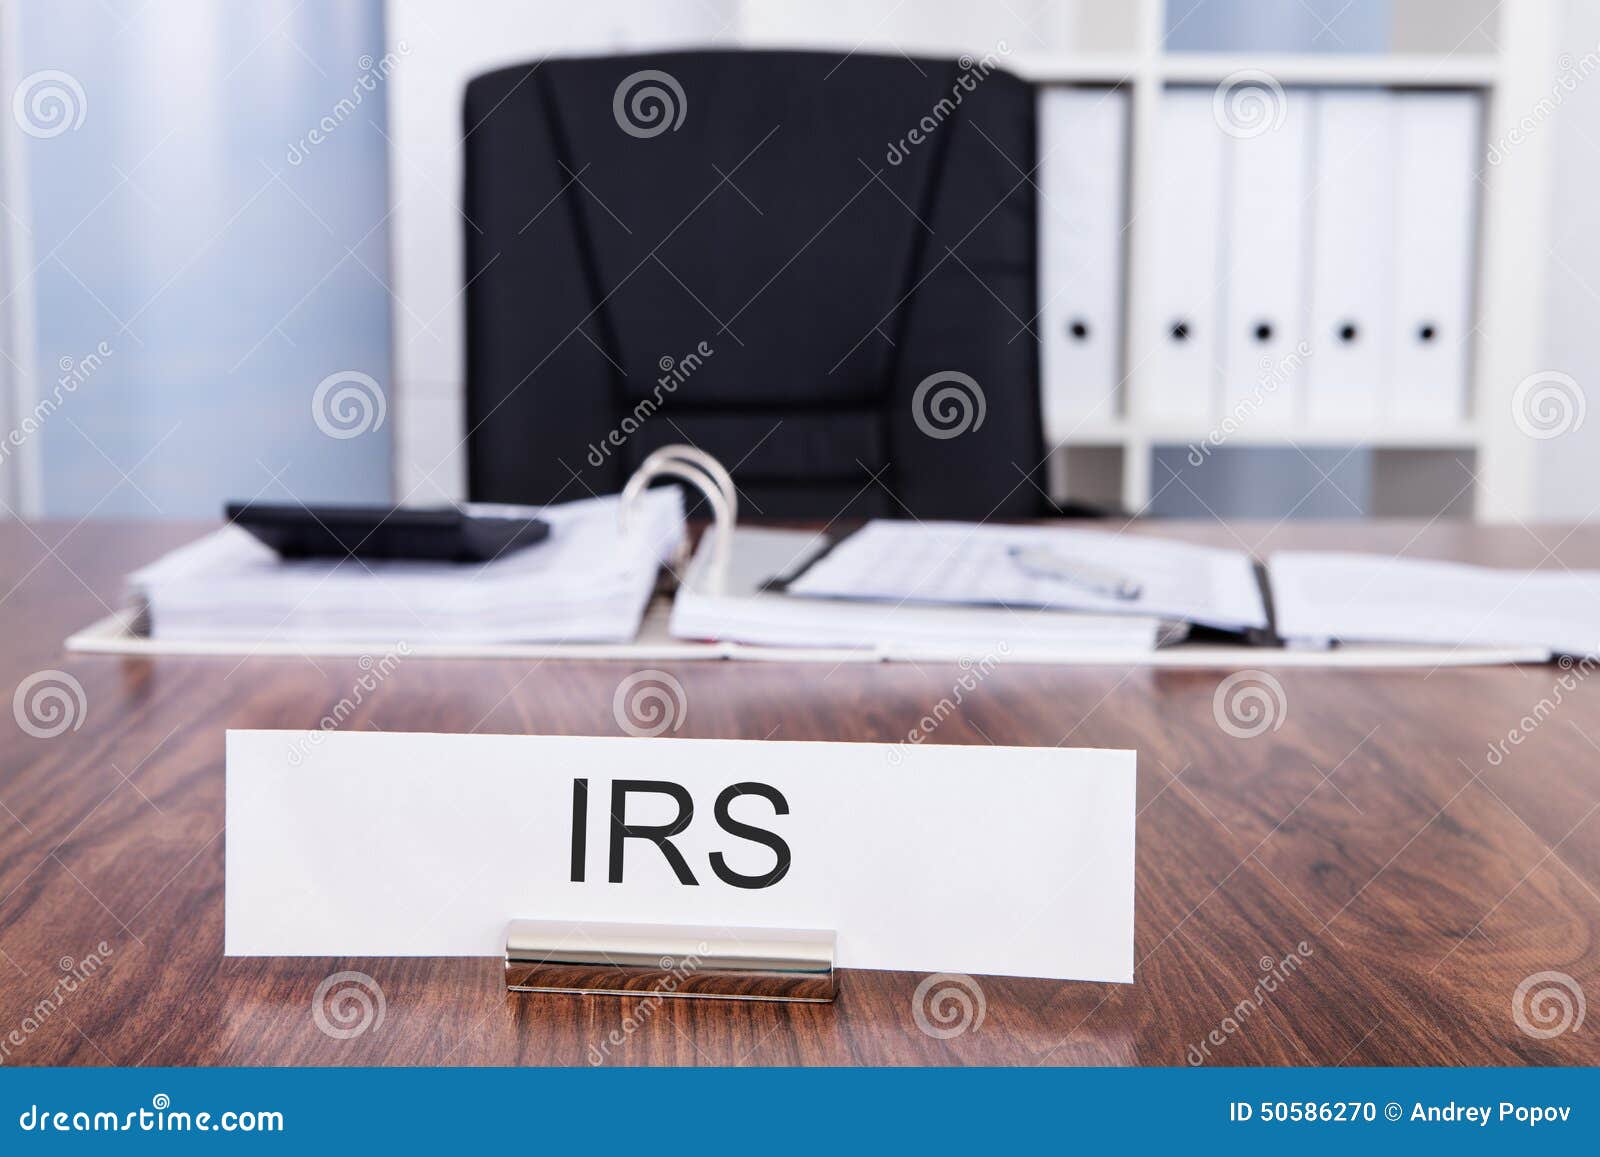 irs nameplate in office